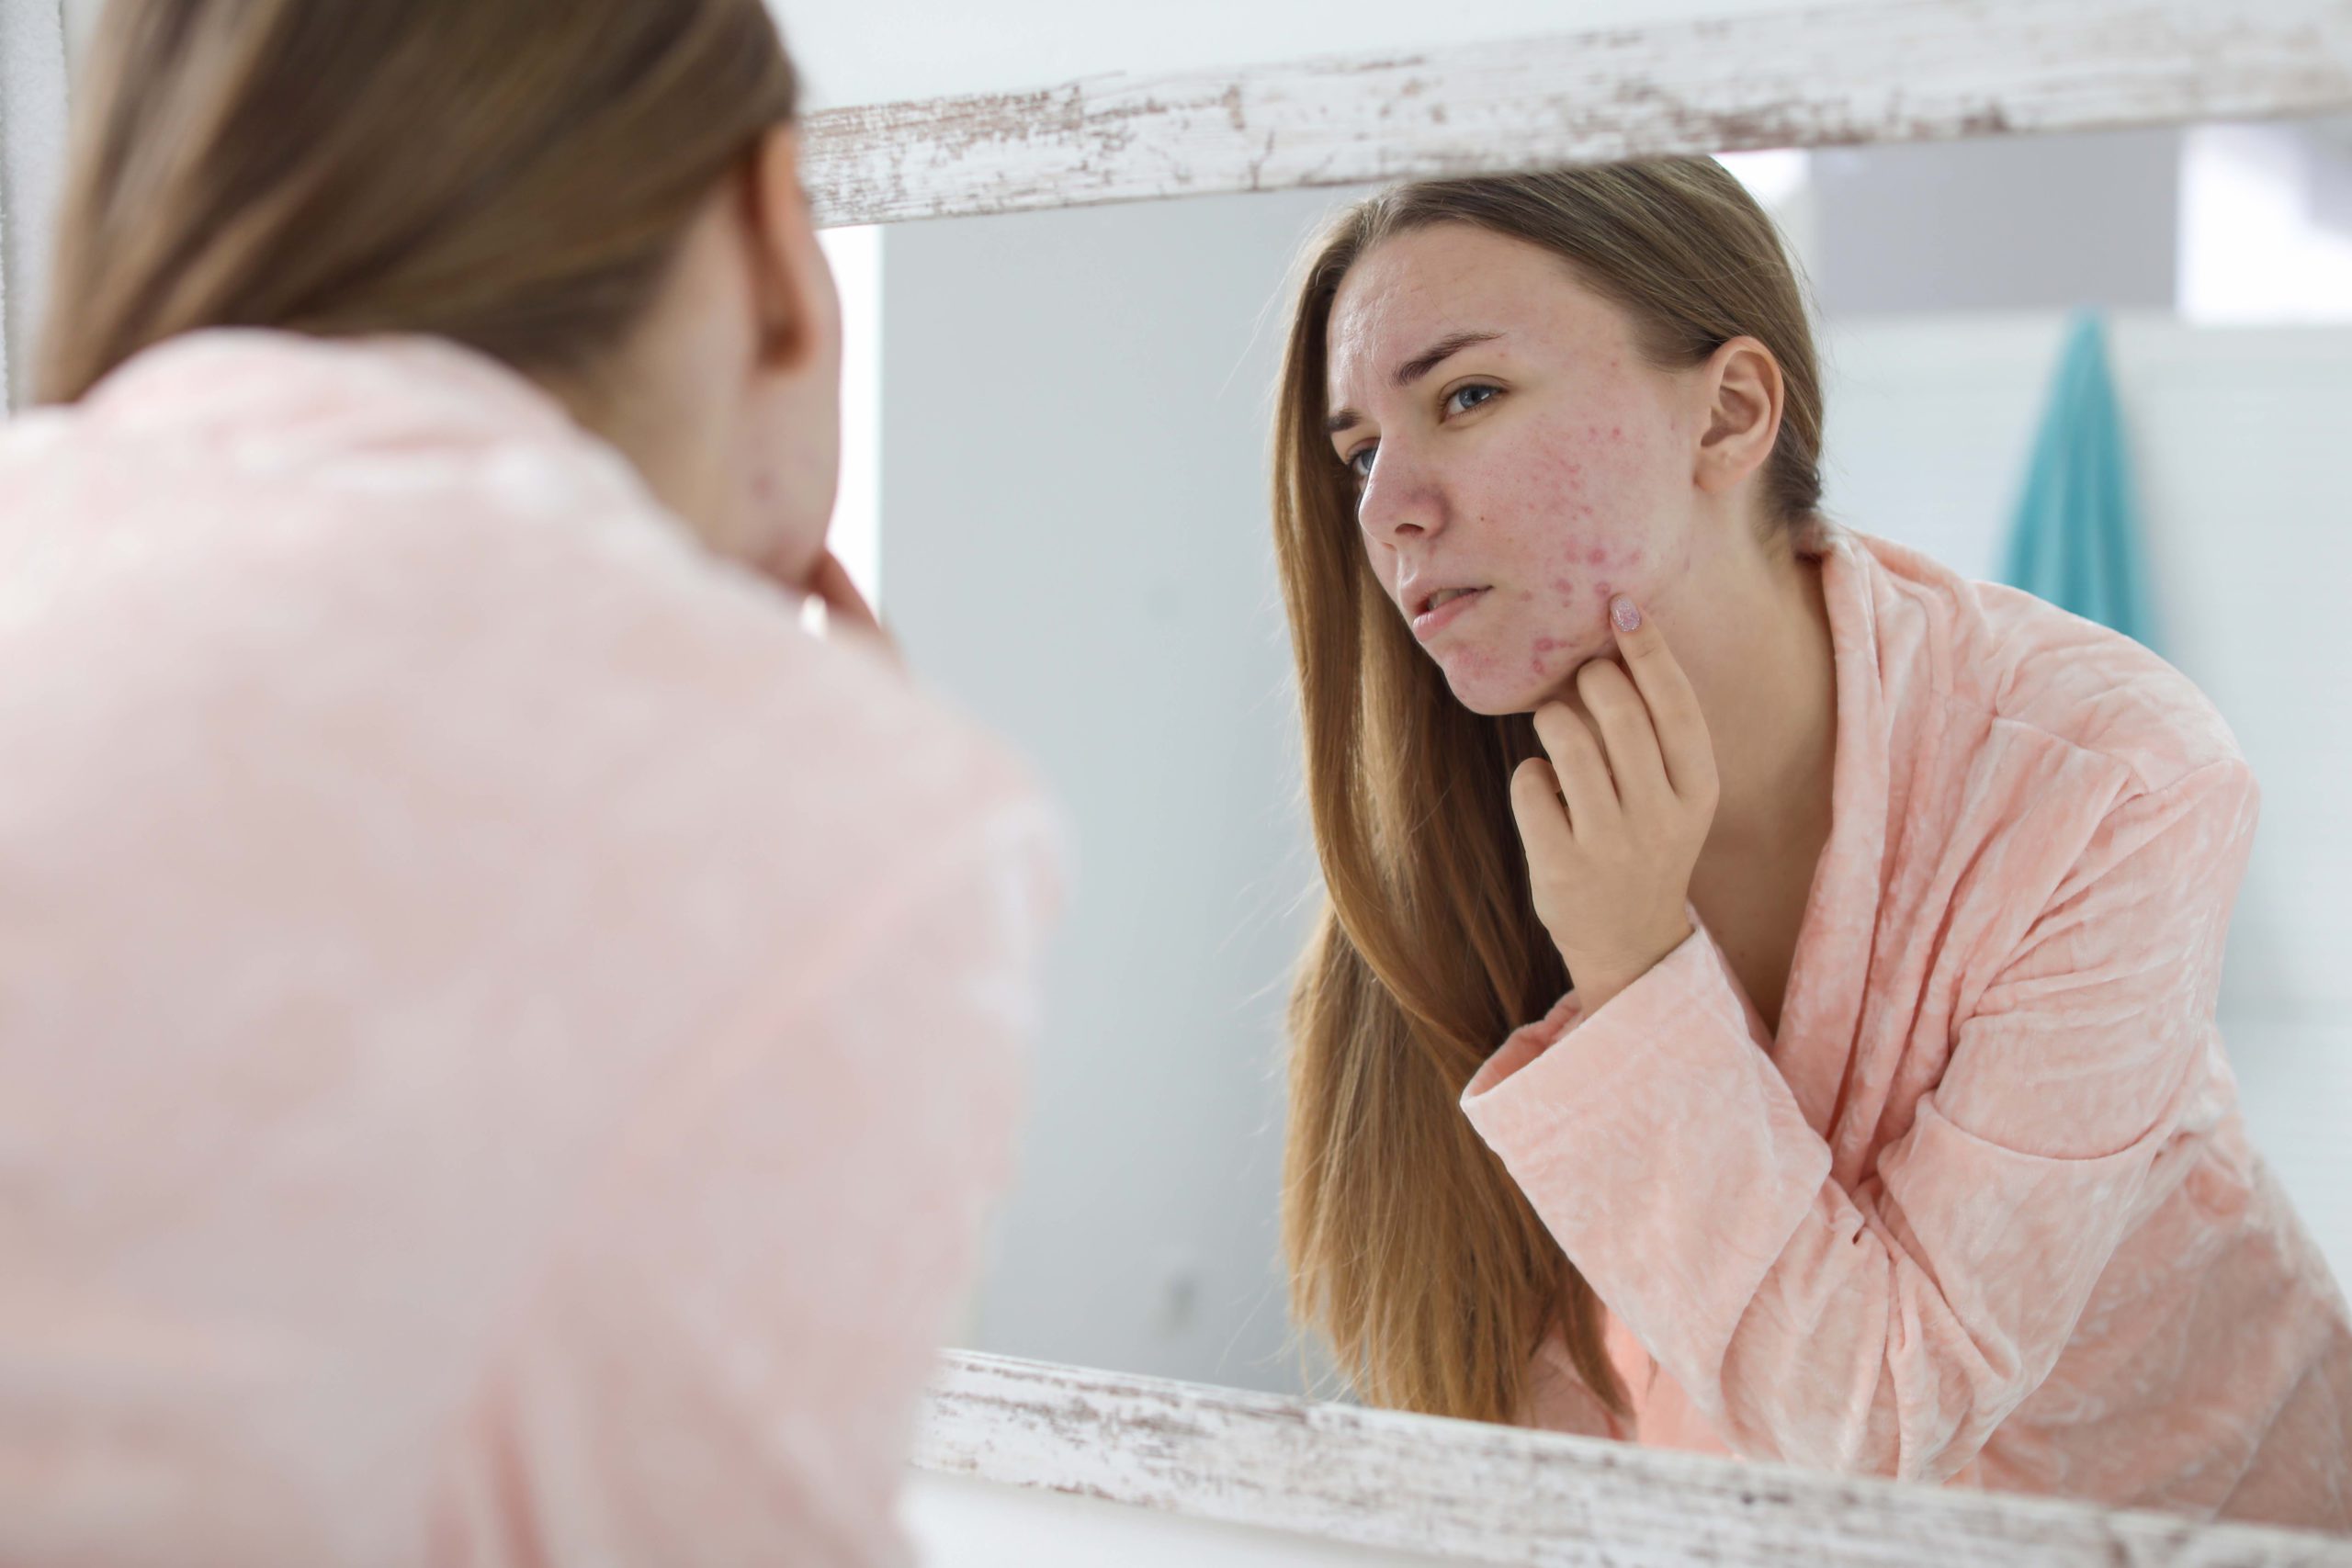 Acne Causes, Prevention, and Treatment